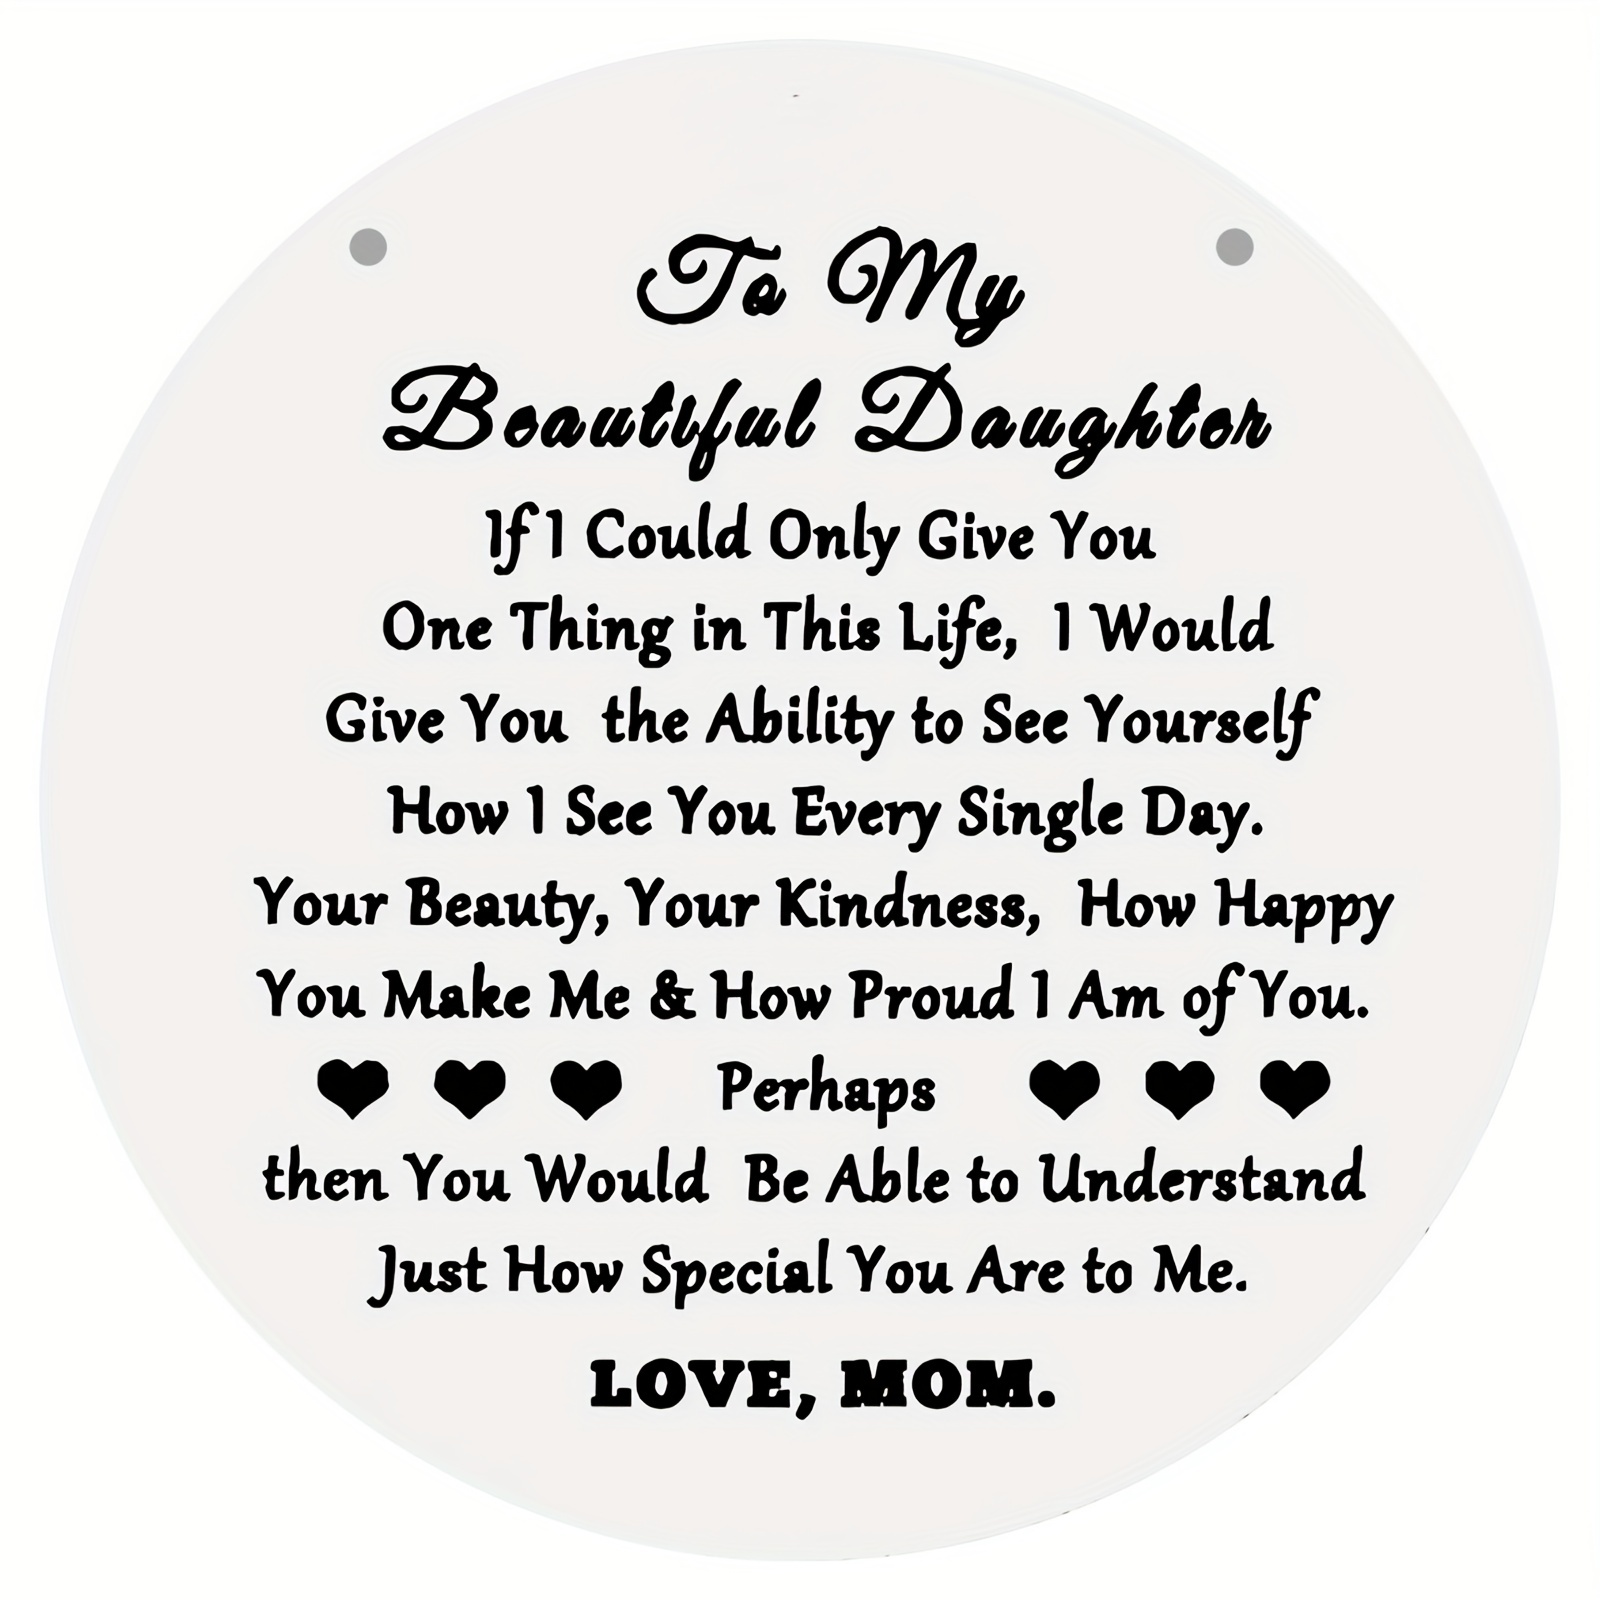 Unique Mom Gifts Birthday Gifts for Mother from Daughter Poem